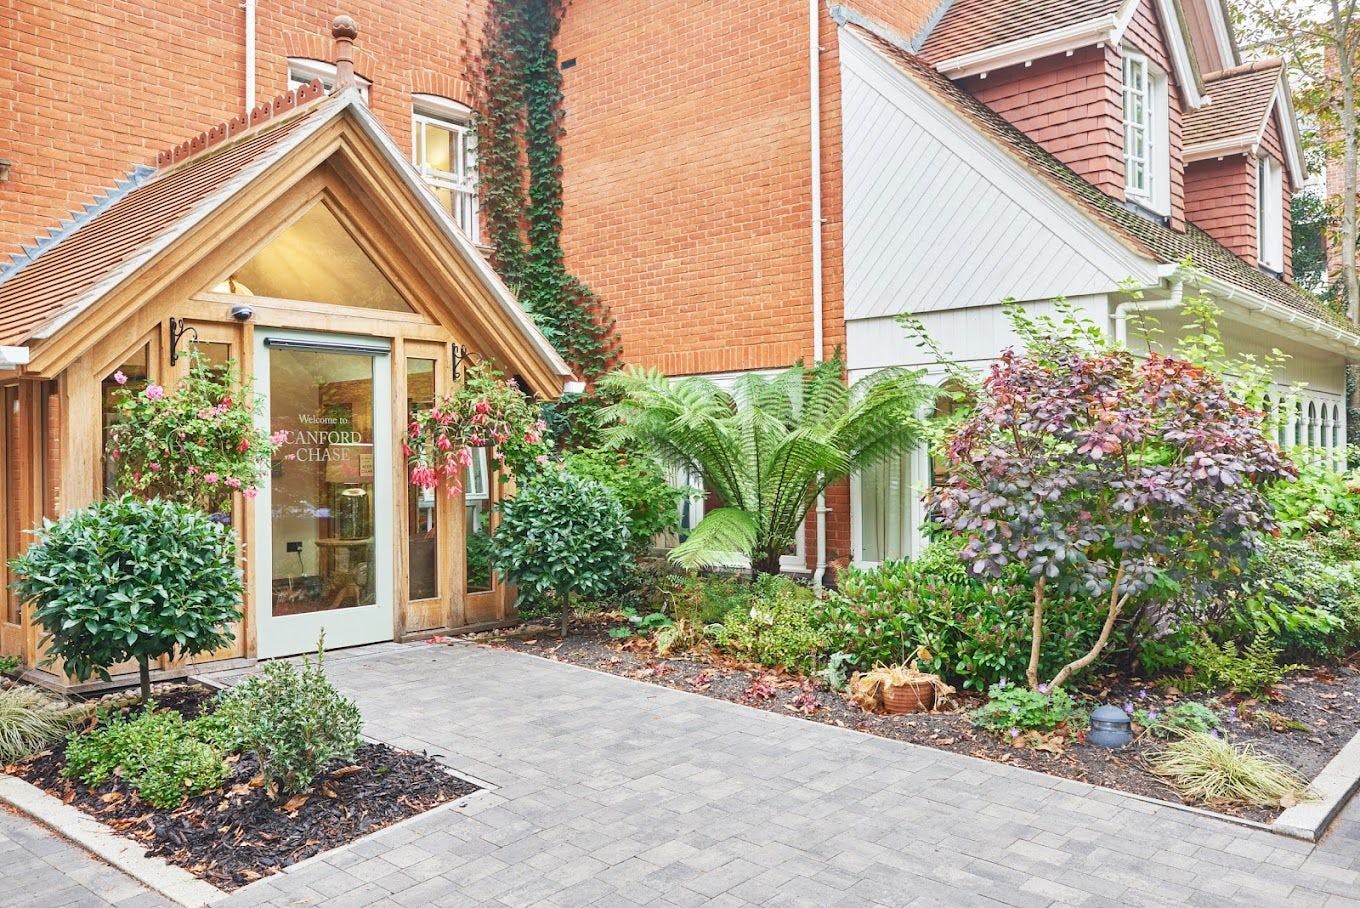 Canford Chase Care Home in Poole